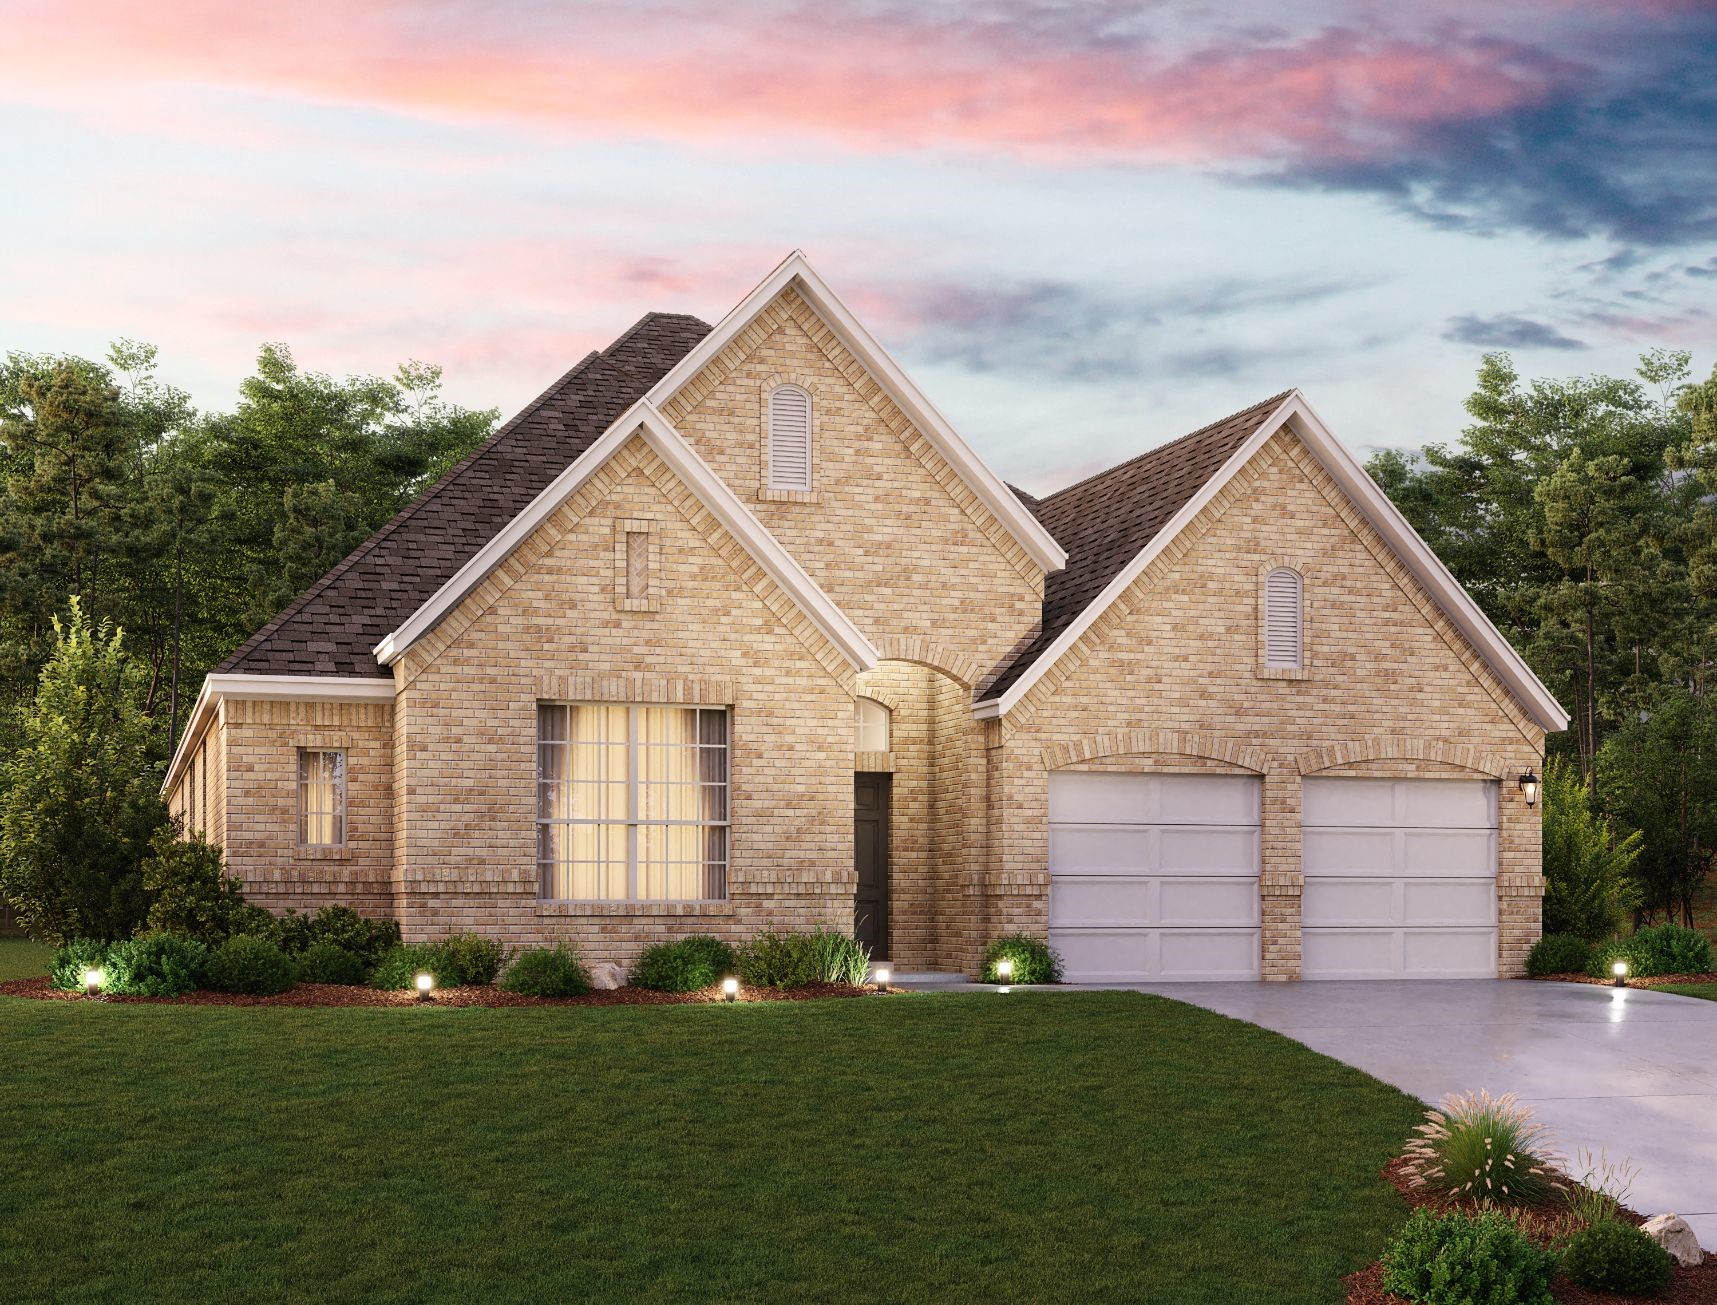 Welcome home to 32306 Elmwood Manor located in the Oakwood Estates community zoned to Waller ISD.